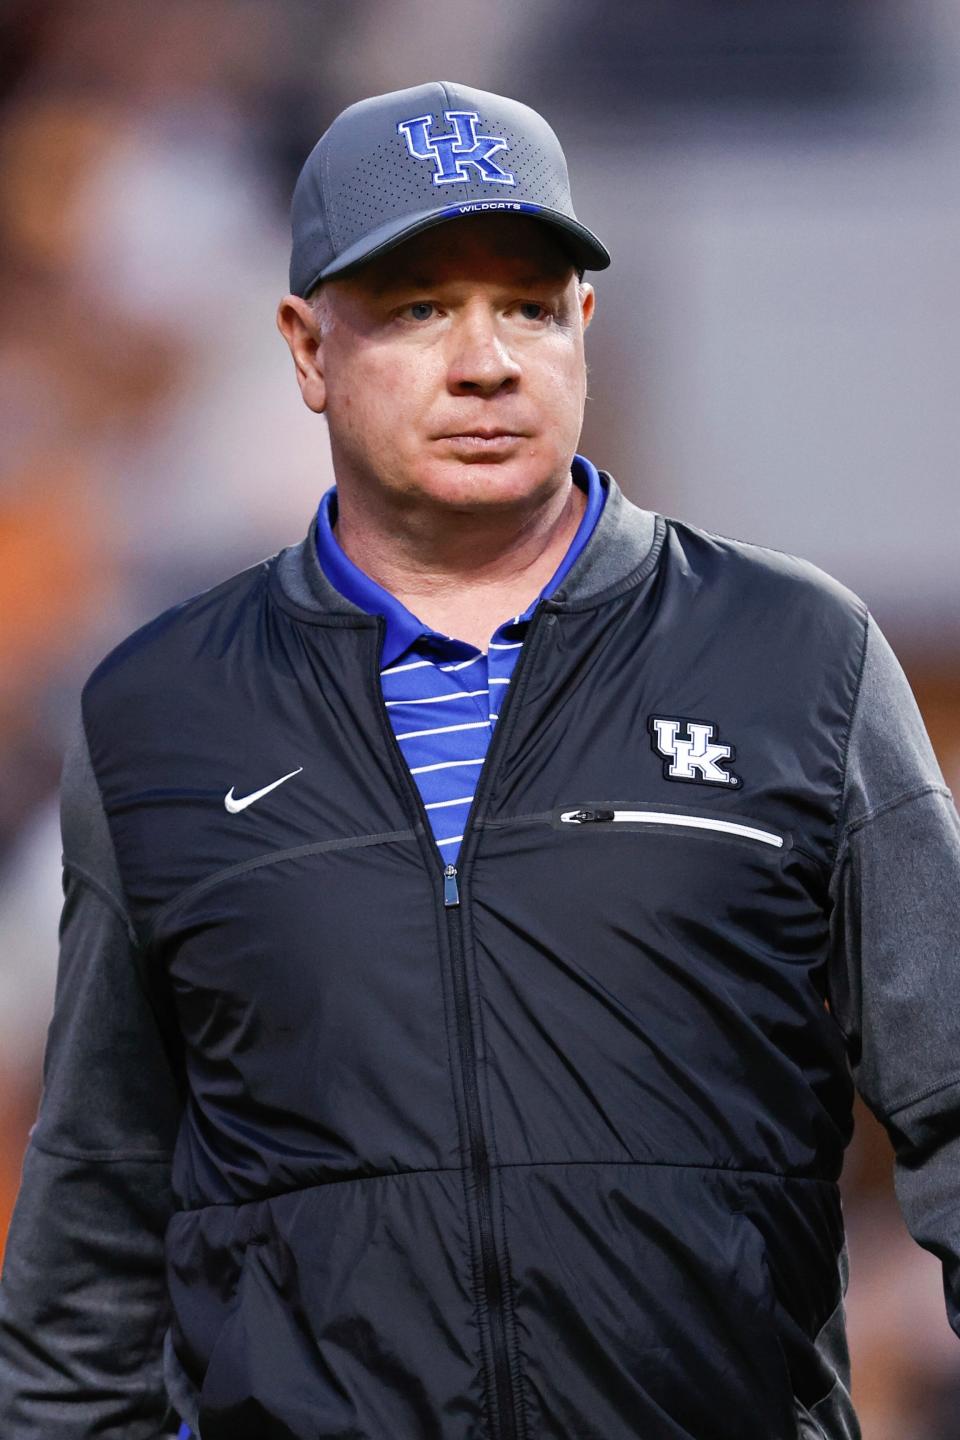 Kentucky head coach Mark Stoops watches as his team warms up before an NCAA college football game against Tennessee, Saturday, Oct. 29, 2022, in Knoxville, Tenn. (AP Photo/Wade Payne)